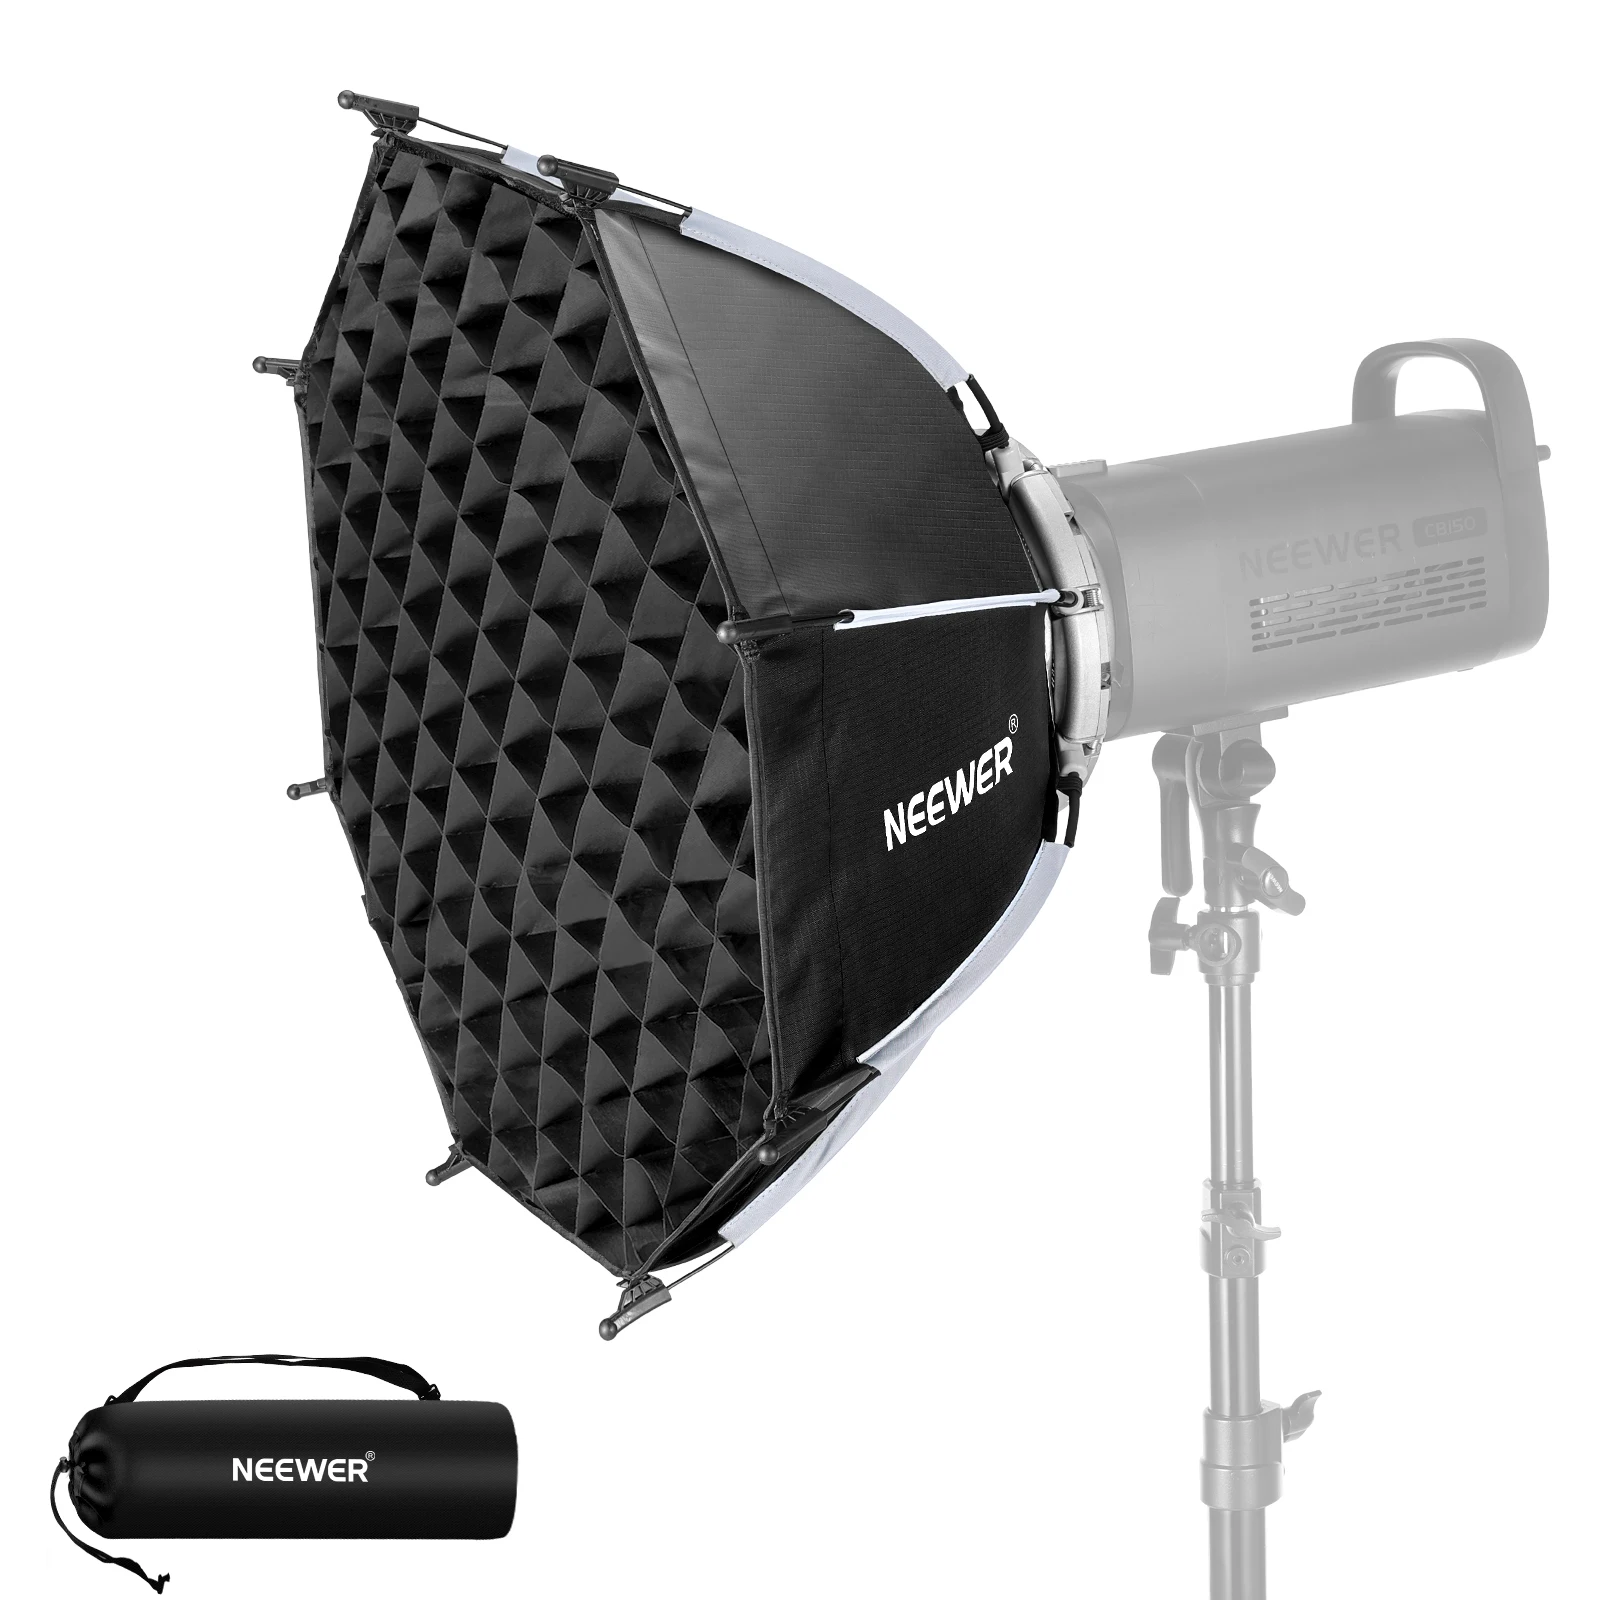 

NEEWER Octagonal Softbox, Quick Release Bowens Mount Softbox with Honeycomb Grid, Light Diffusers, Bag for RGB CB60 CB60B CB200B